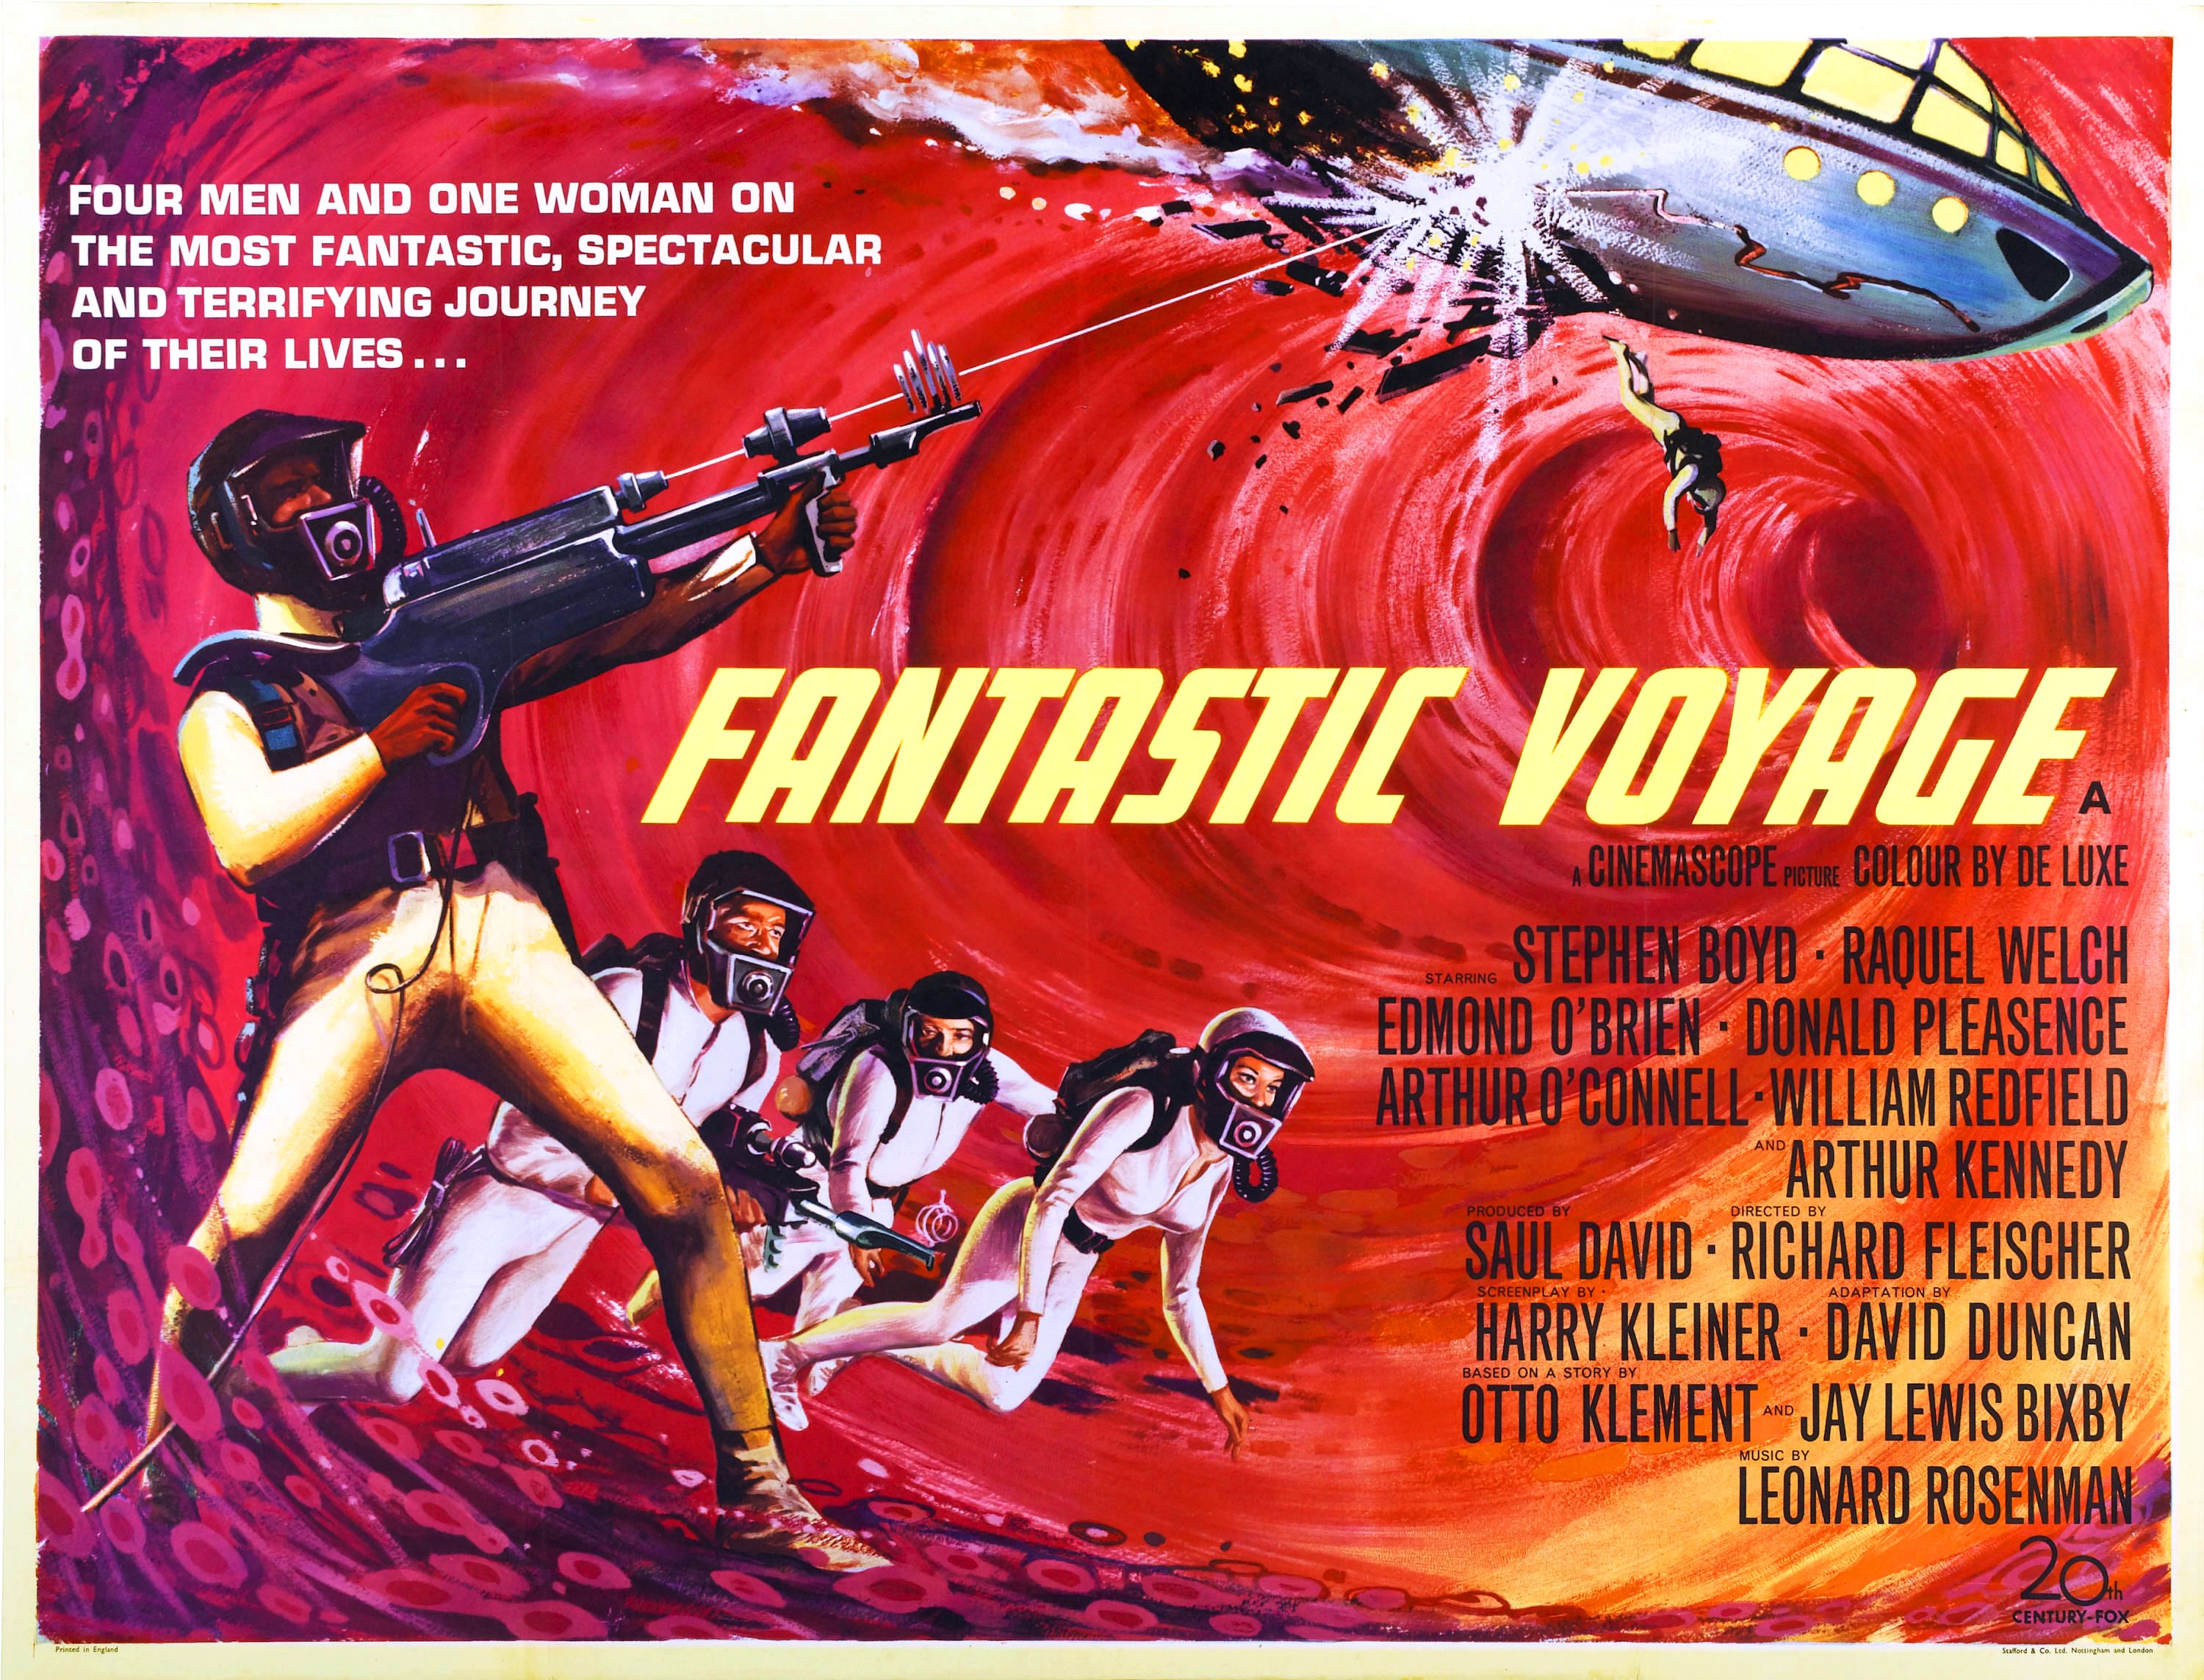 fantastic voyage movie poster - Four Men And One Woman On The Most Fantastic, Spectacular And Terrifying Journey Of Their Lives... Fantastic Voyage Cinemascope. Colour By De Luxe Stephen Boyd Raquel Welch Edmond O'Brien. Donald Pleasence Arthur O'ConnellW